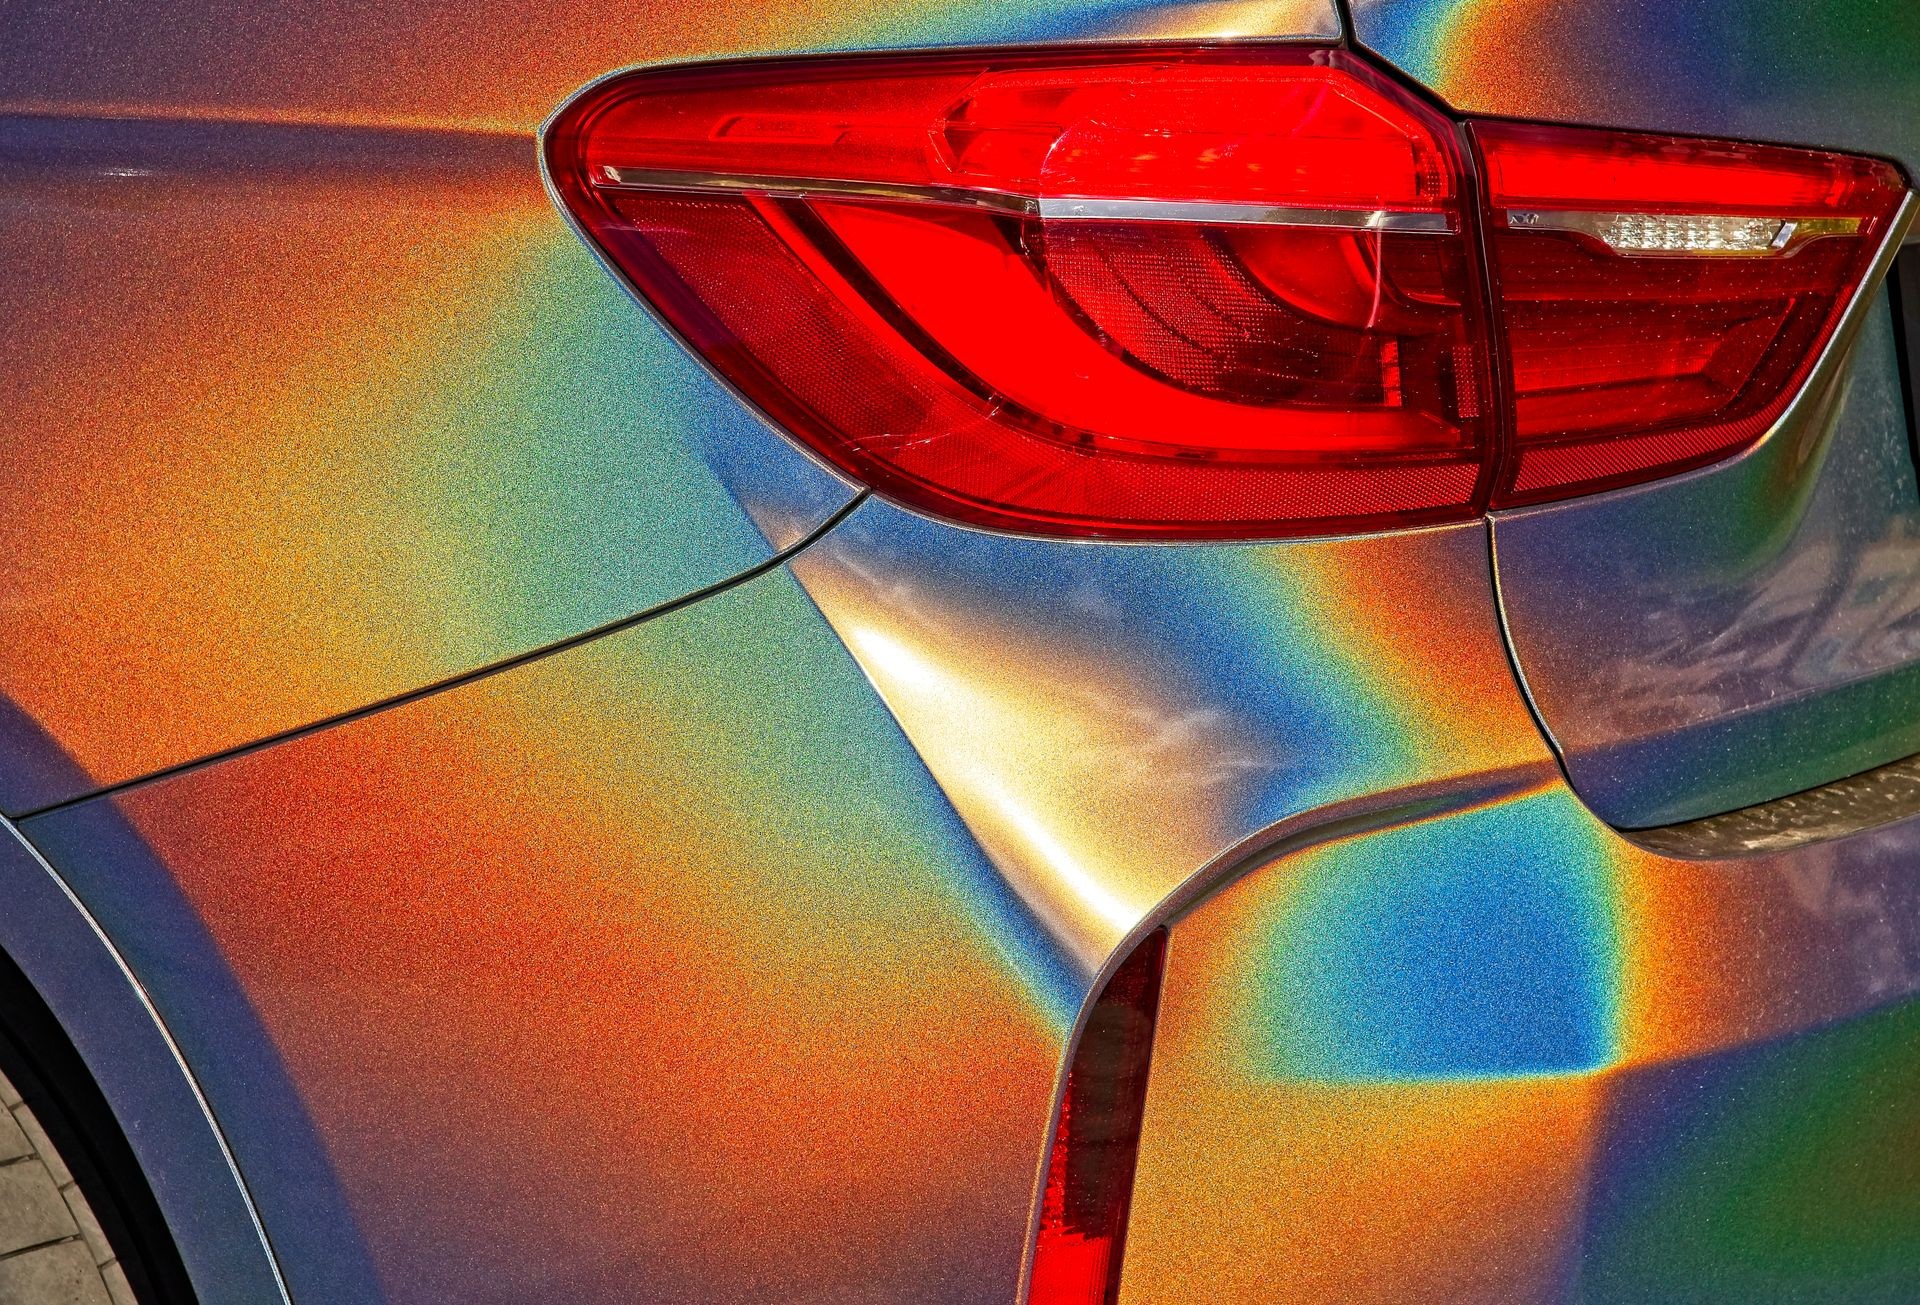 Detail of rear corner and light of car with shiny color shifting paint.